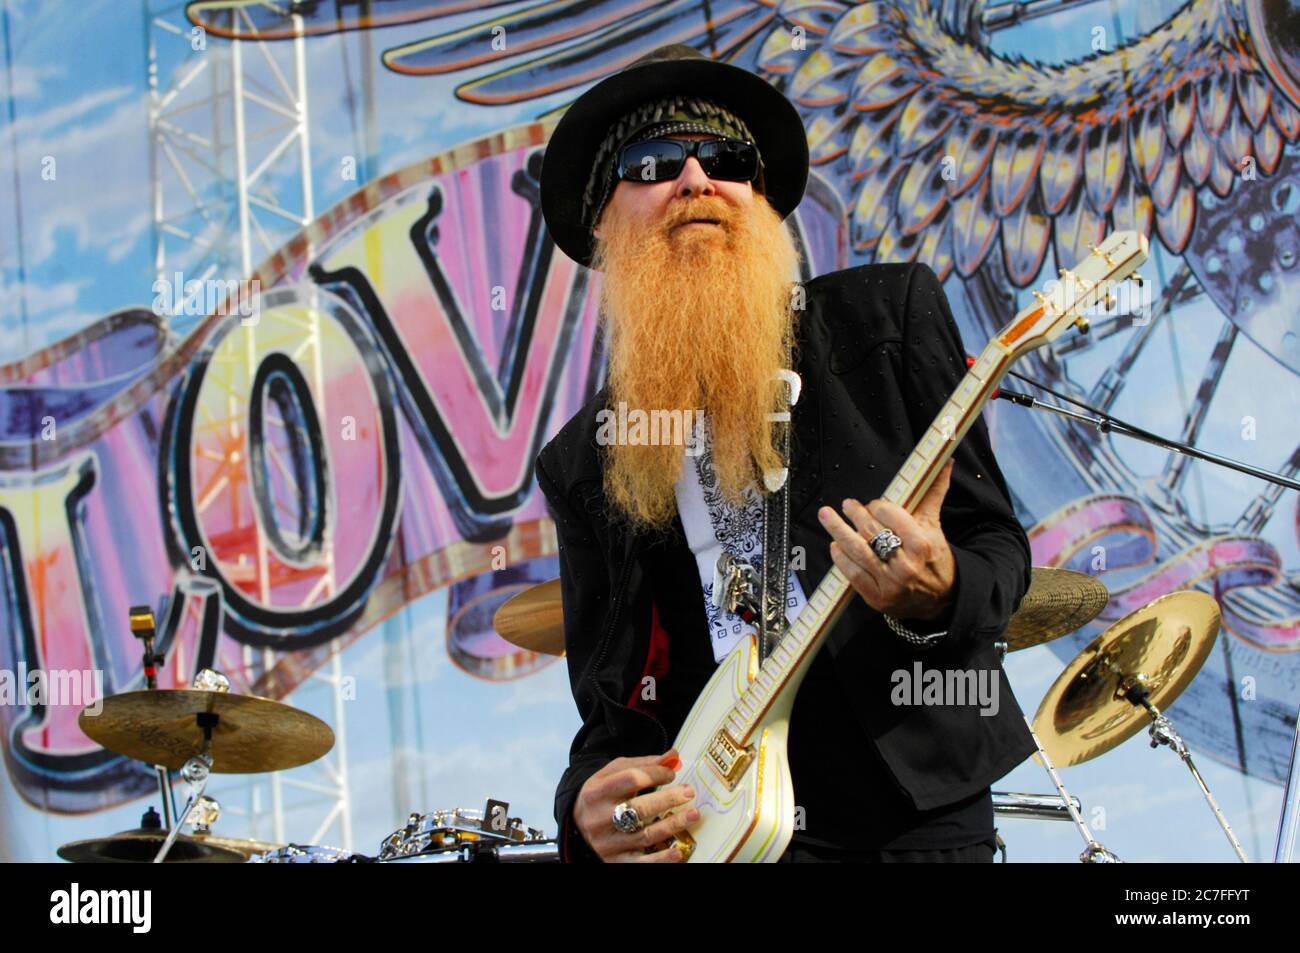 Billy Gibbons of ZZ Top performs at the Love Ride at the Pomona Fairplex on October 26, 2008 in Pomona, California. Credit: Jared Milgrim/The Photo Access Stock Photo